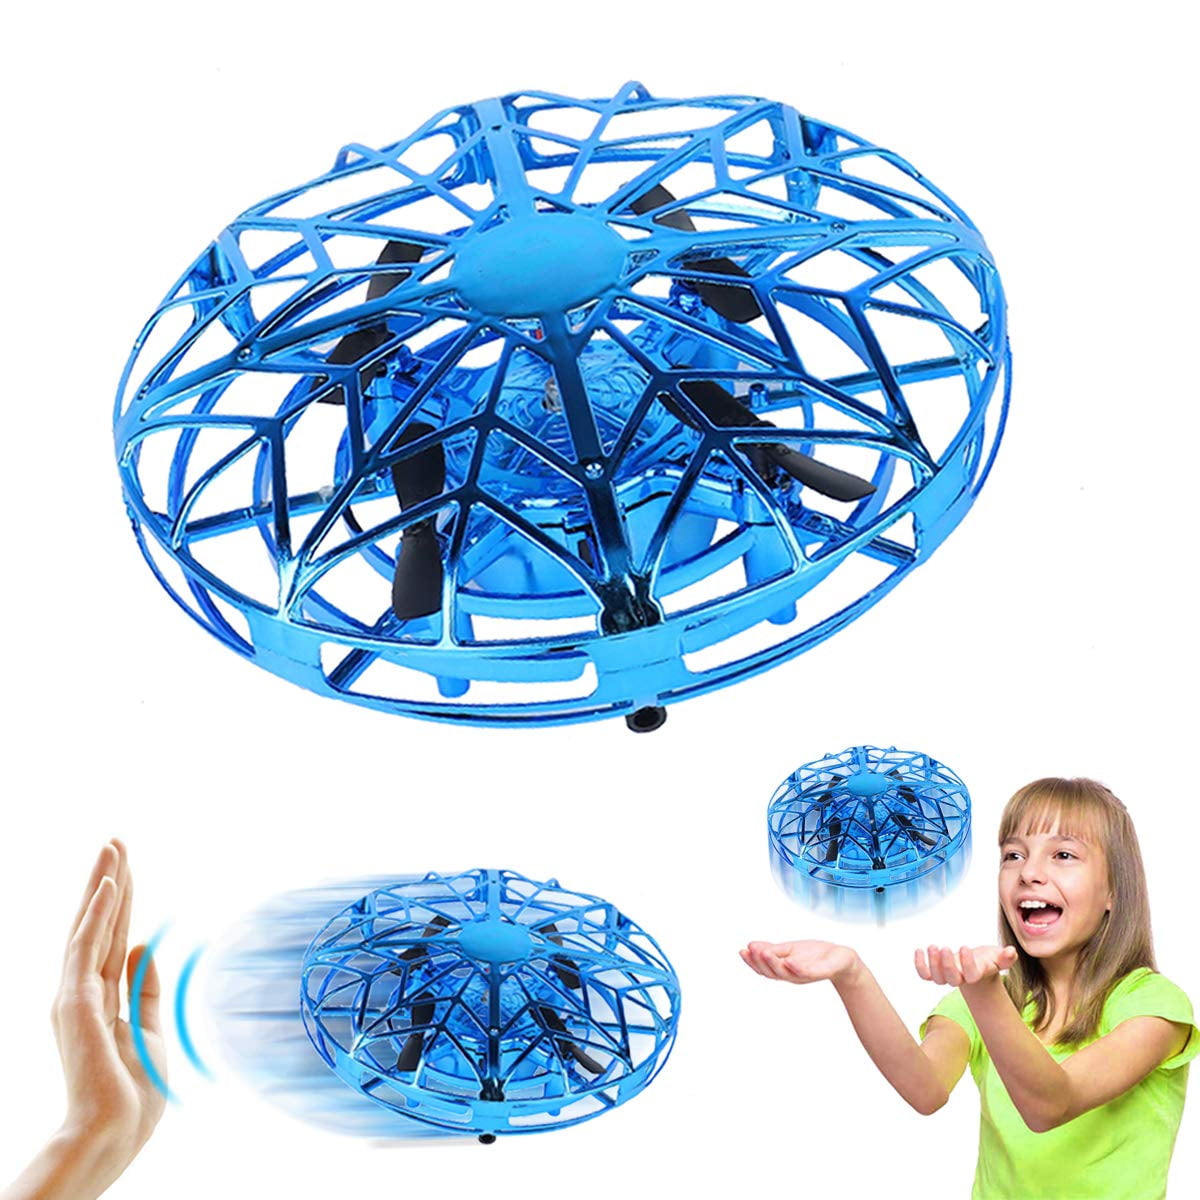 Interactive Smart Flying Drone Hand-Controlled Flying UFO Ball Aircraft Toy Kids 